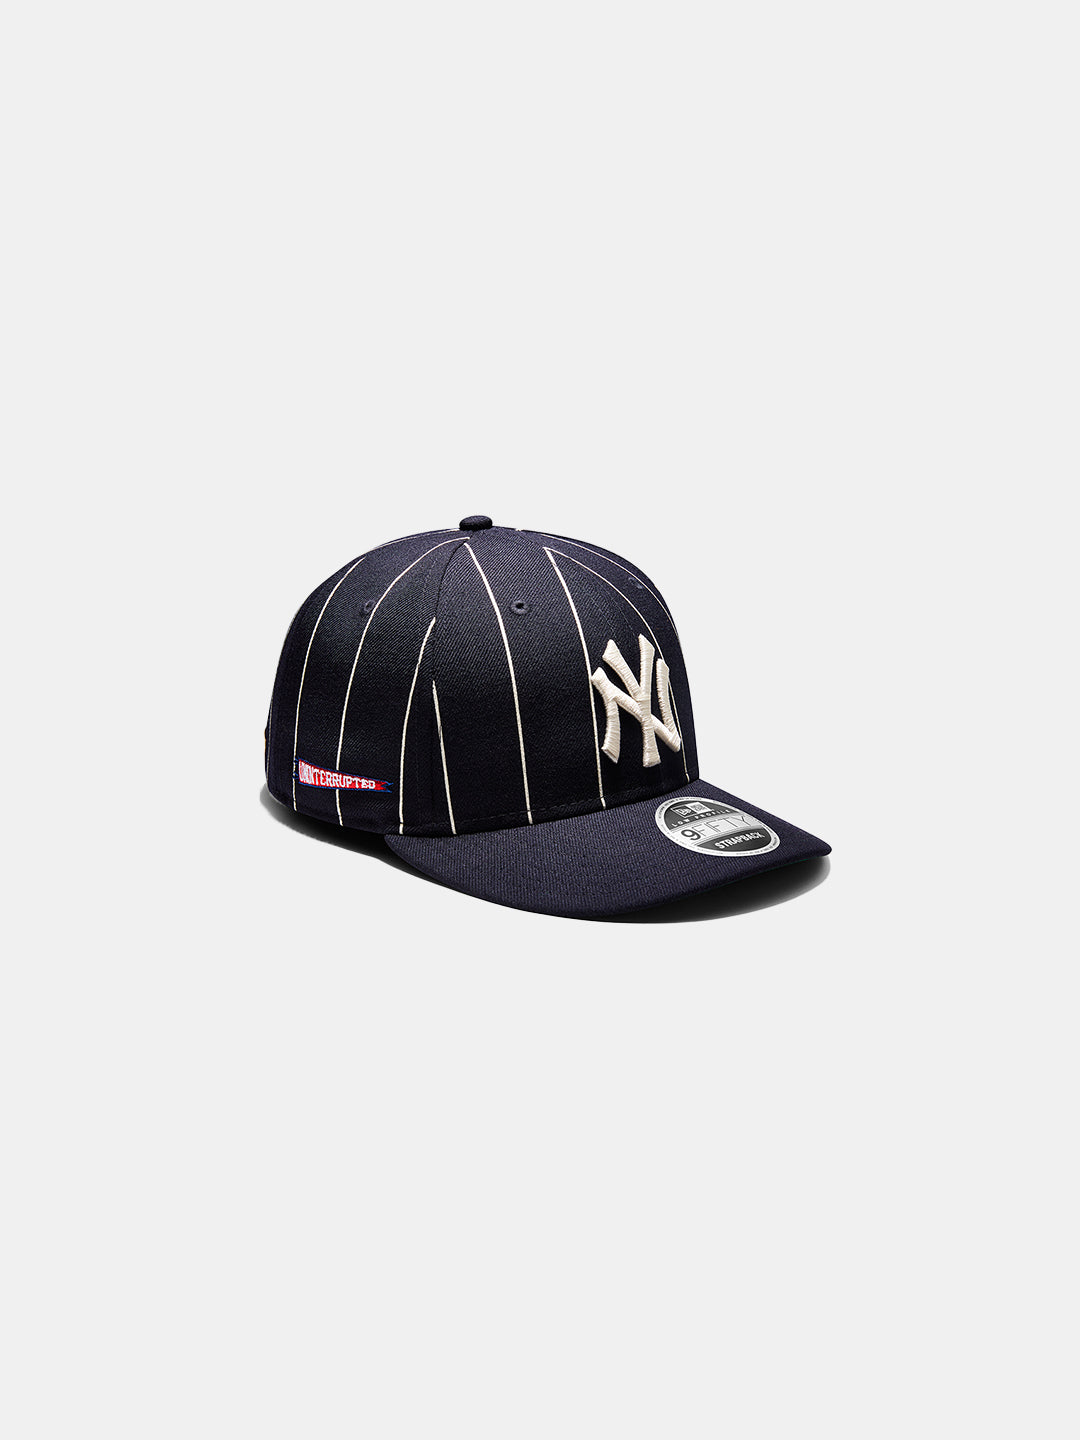 NY Yankees X UNINTERRUPTED Low Profile 9FIFTY